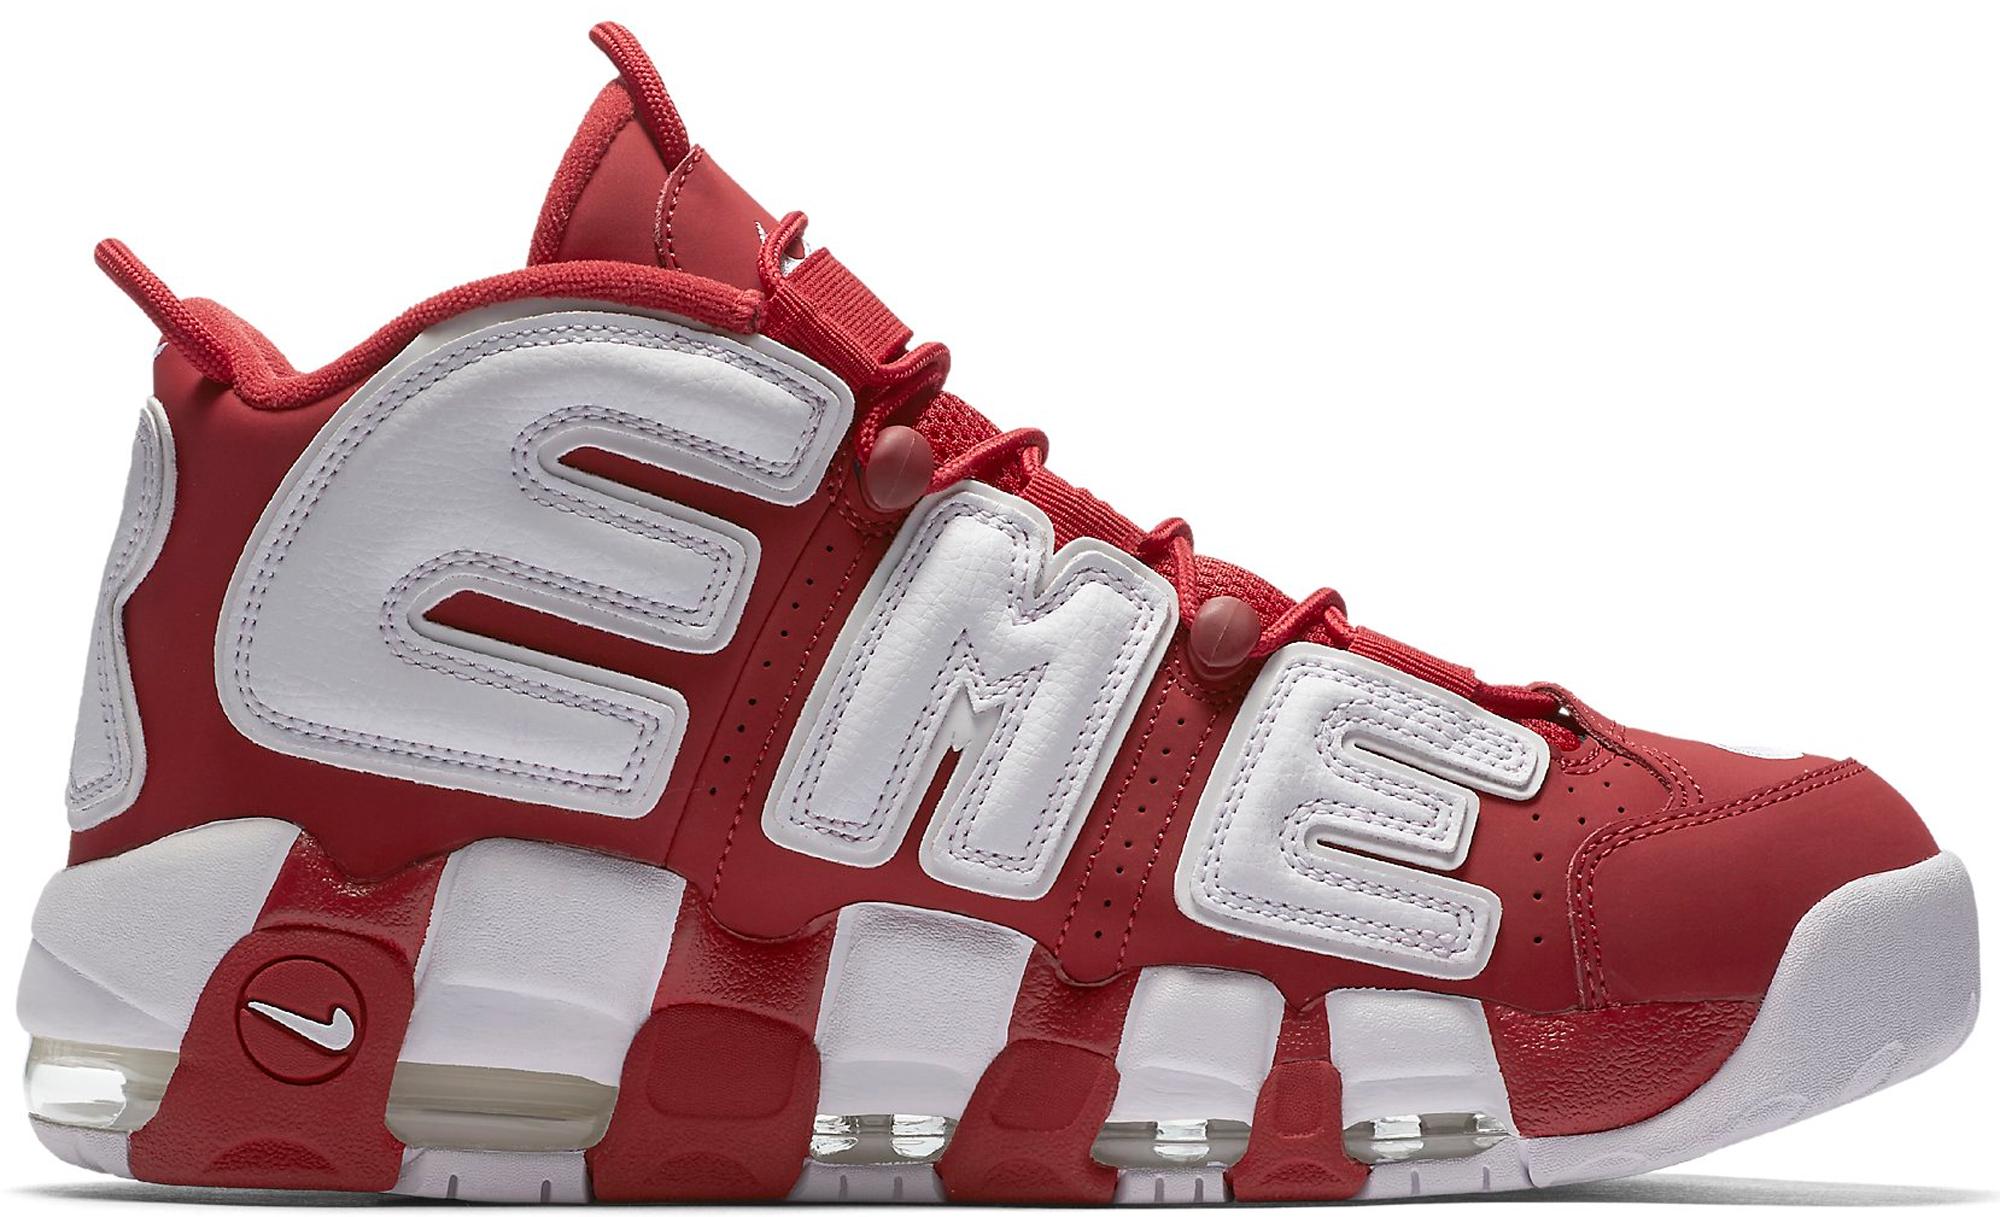 Supreme May Have Combined All of its Uptempo Collabs on One